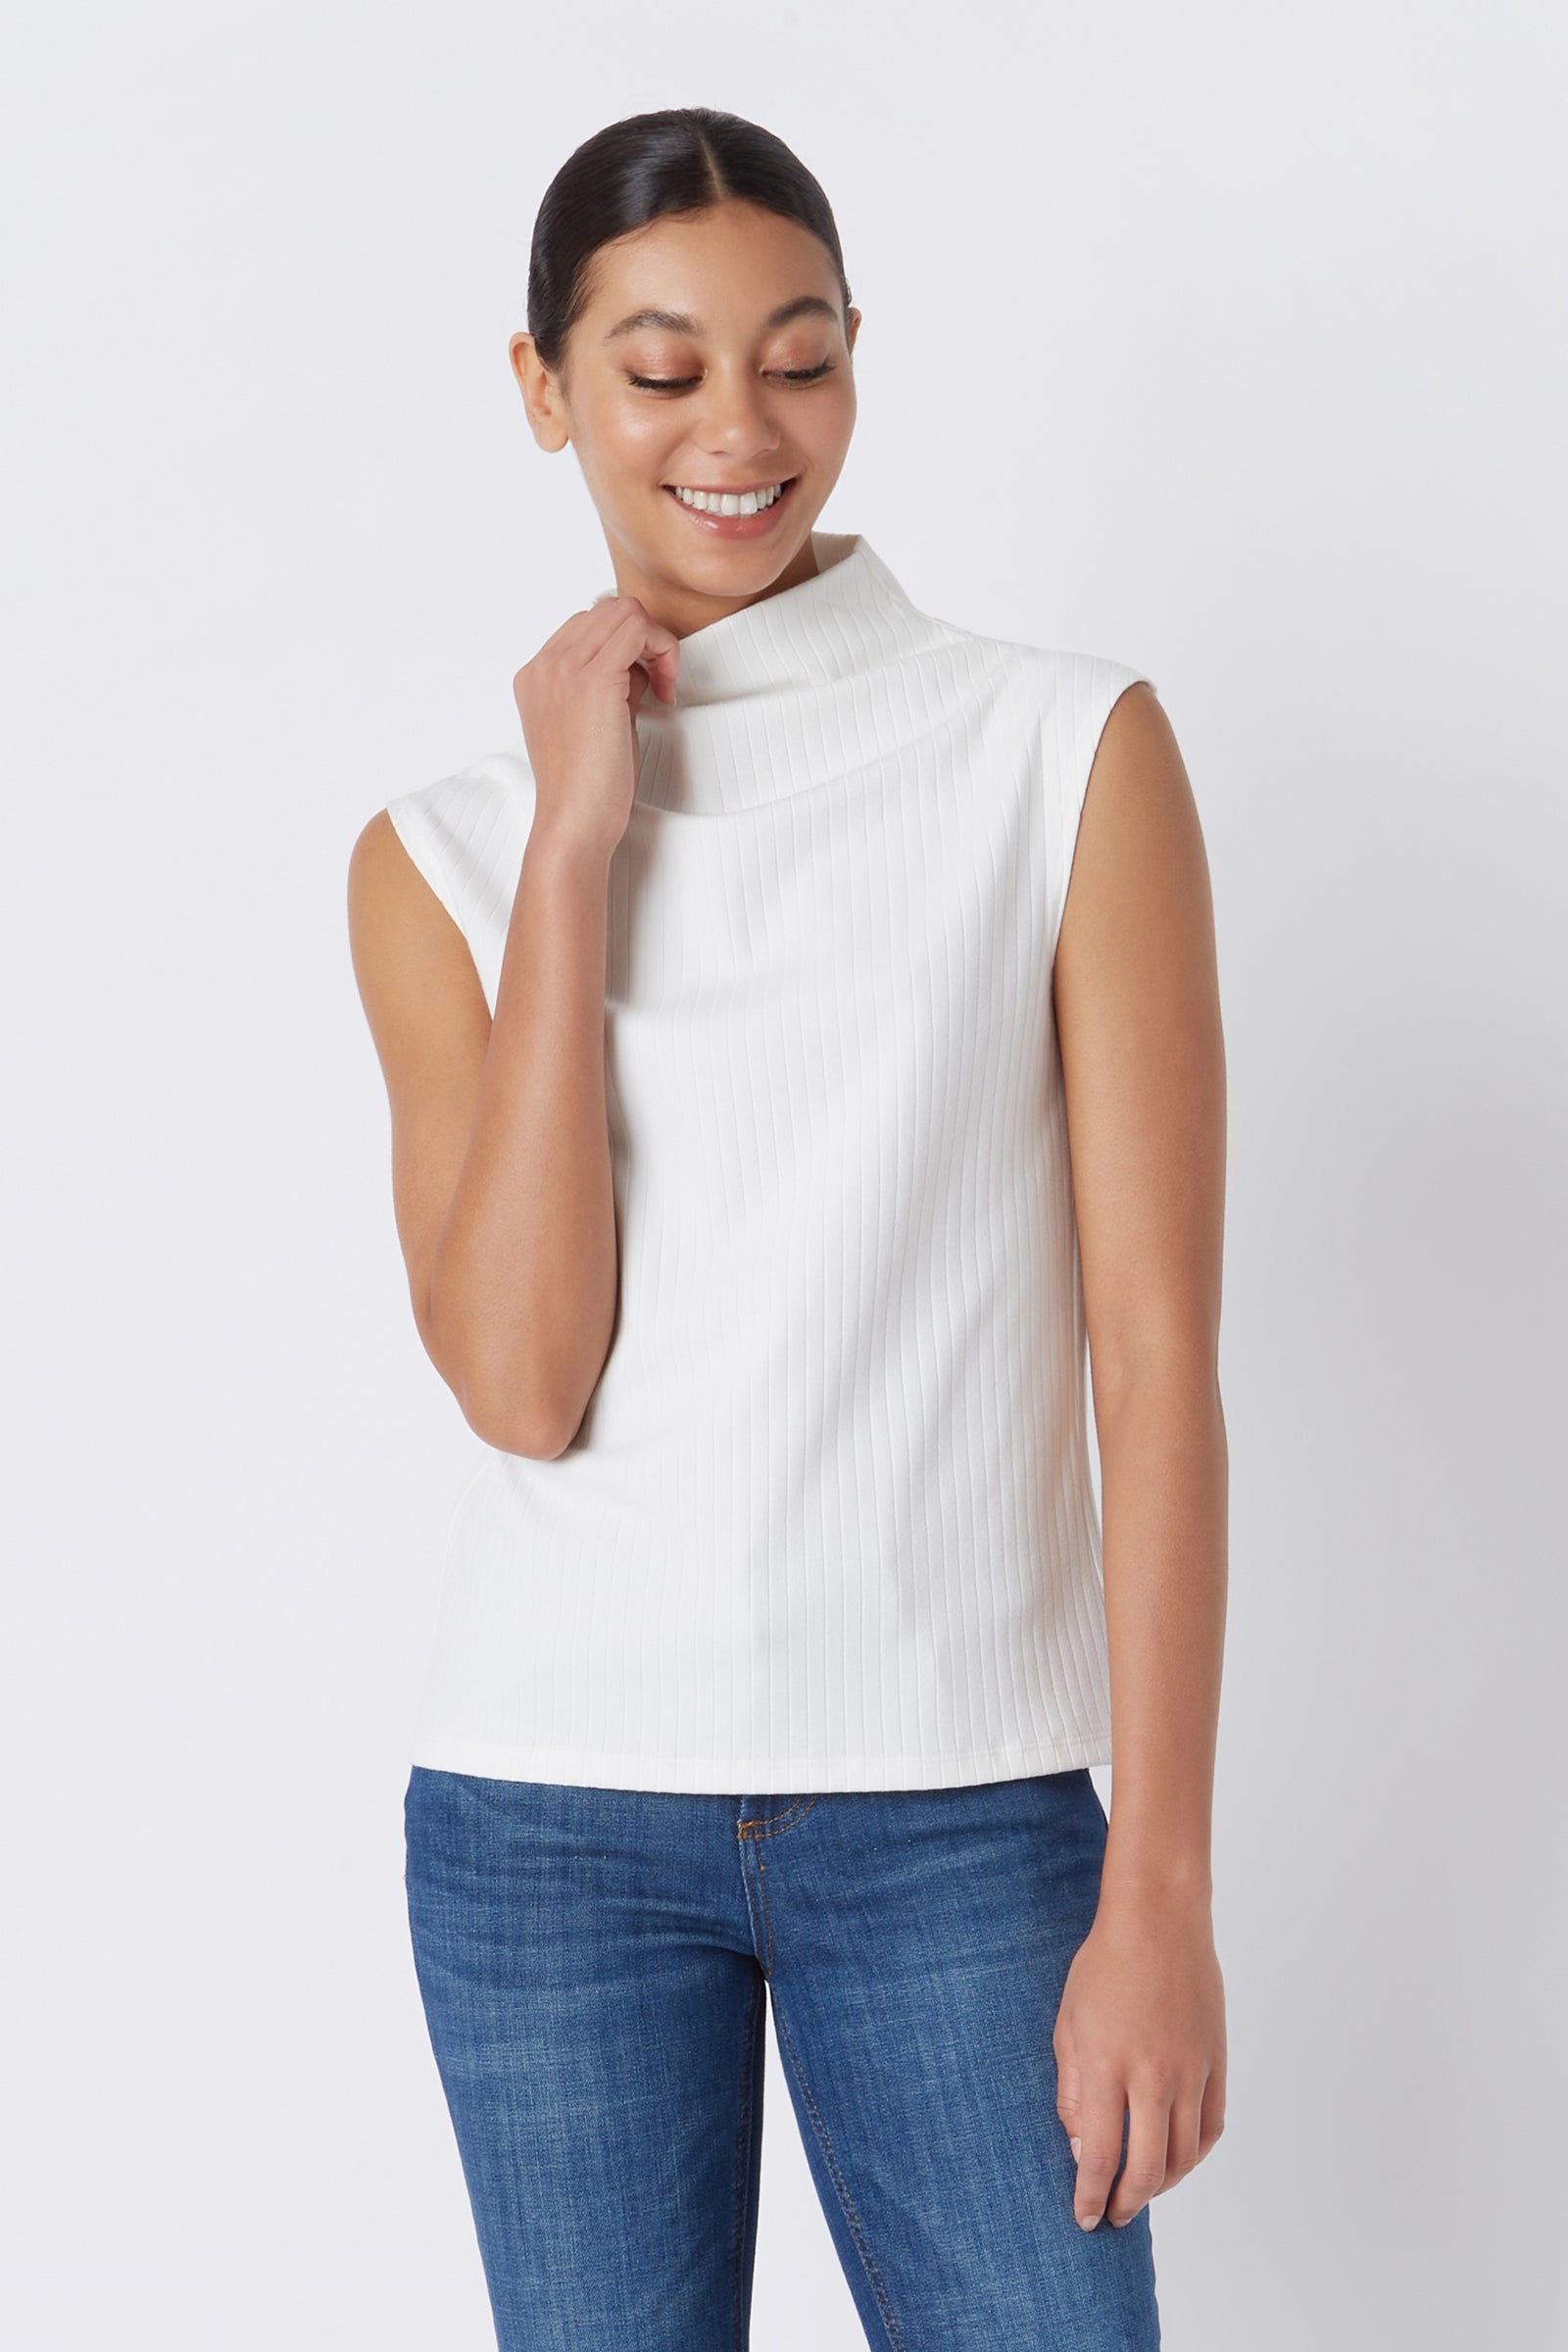 Kal Rieman Eva Funnelneck Tee in Ivory on Model Touching Collar Cropped Front View